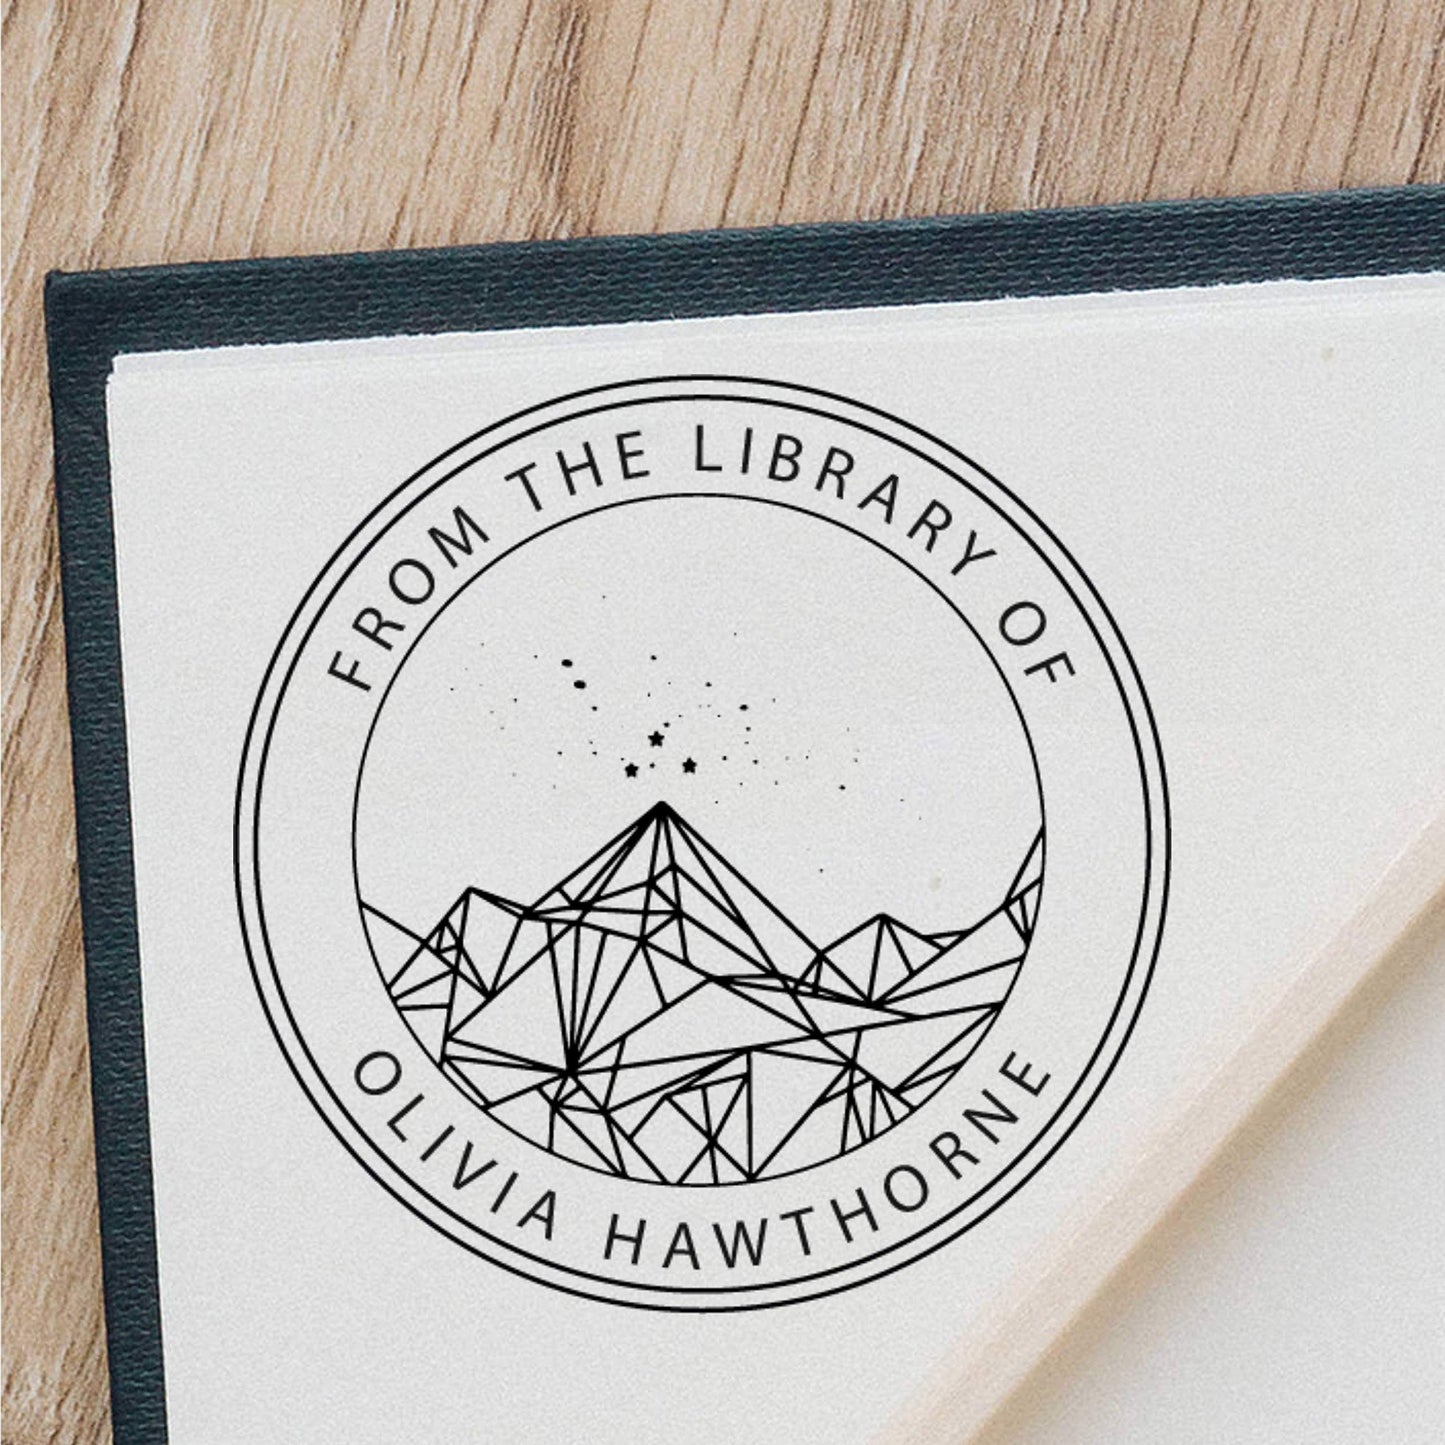 Velaris Personalized Library Stamp from Ex-Libris, Custom Wood or Self-Inking, 7/8" x 2 3/8"